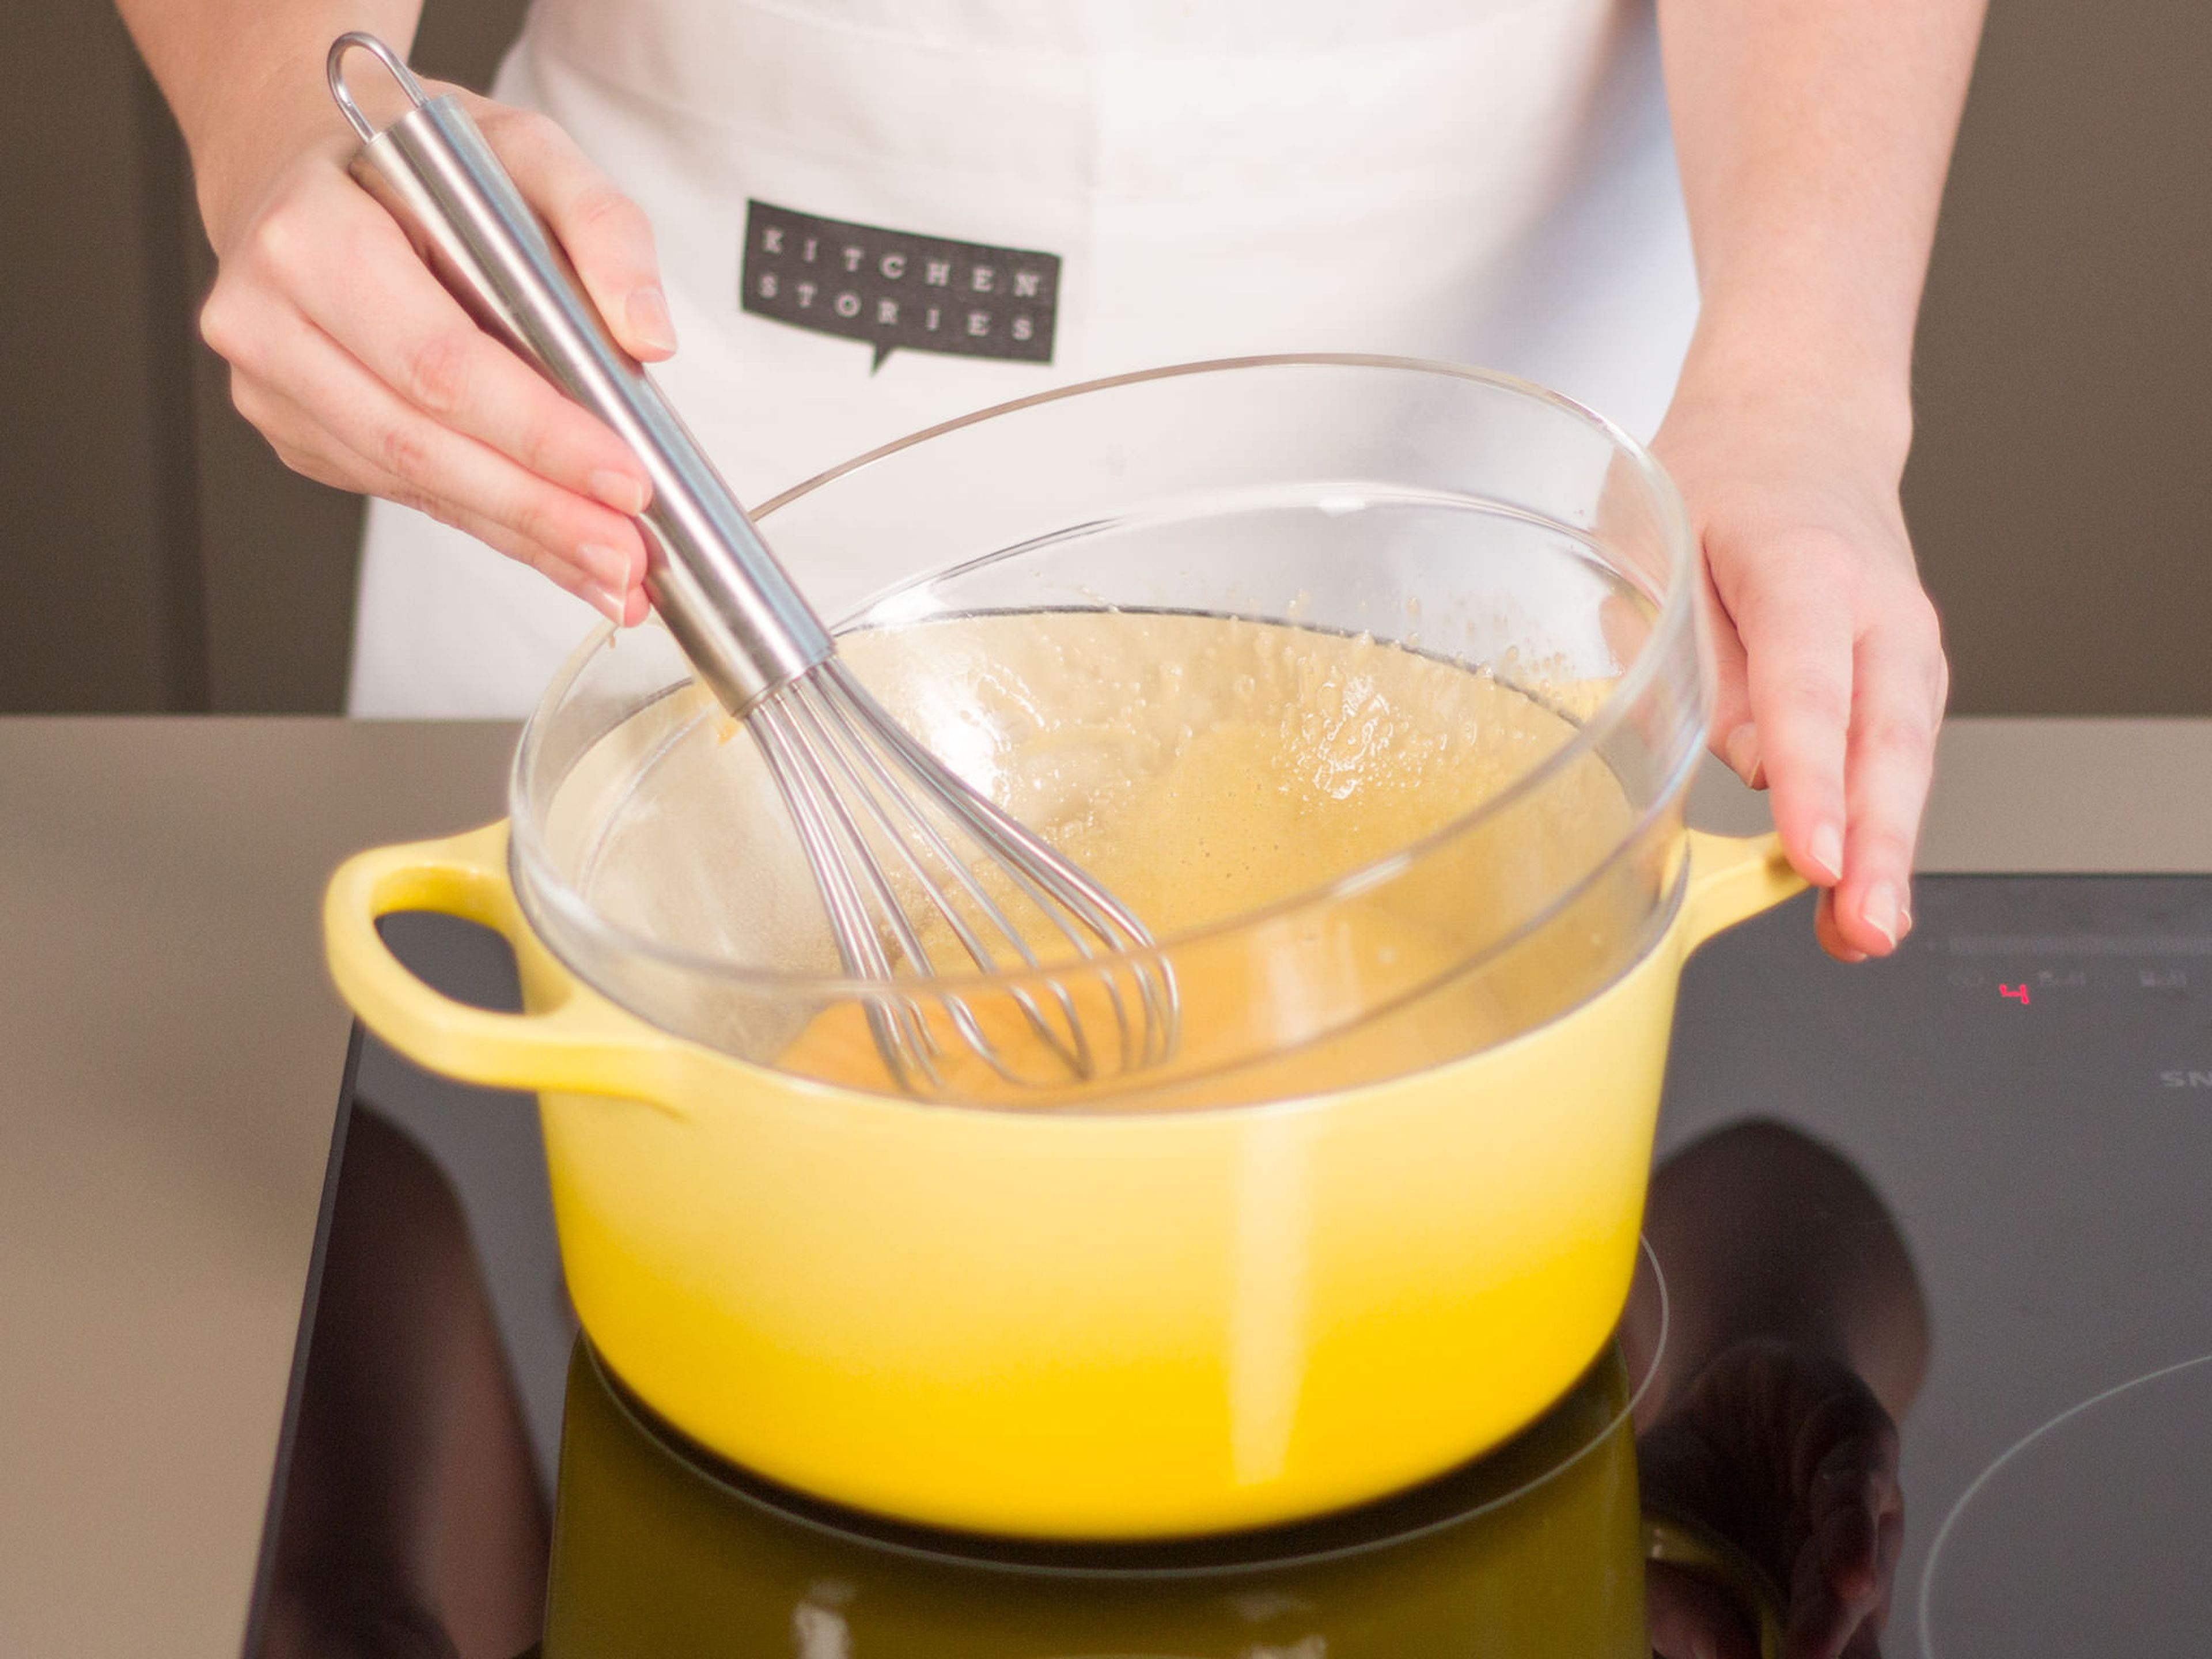 Separate part of the eggs. Add yolk as well as remaining eggs to a large bowl. Place bowl on the water bath and whisk eggs until they are thickened.